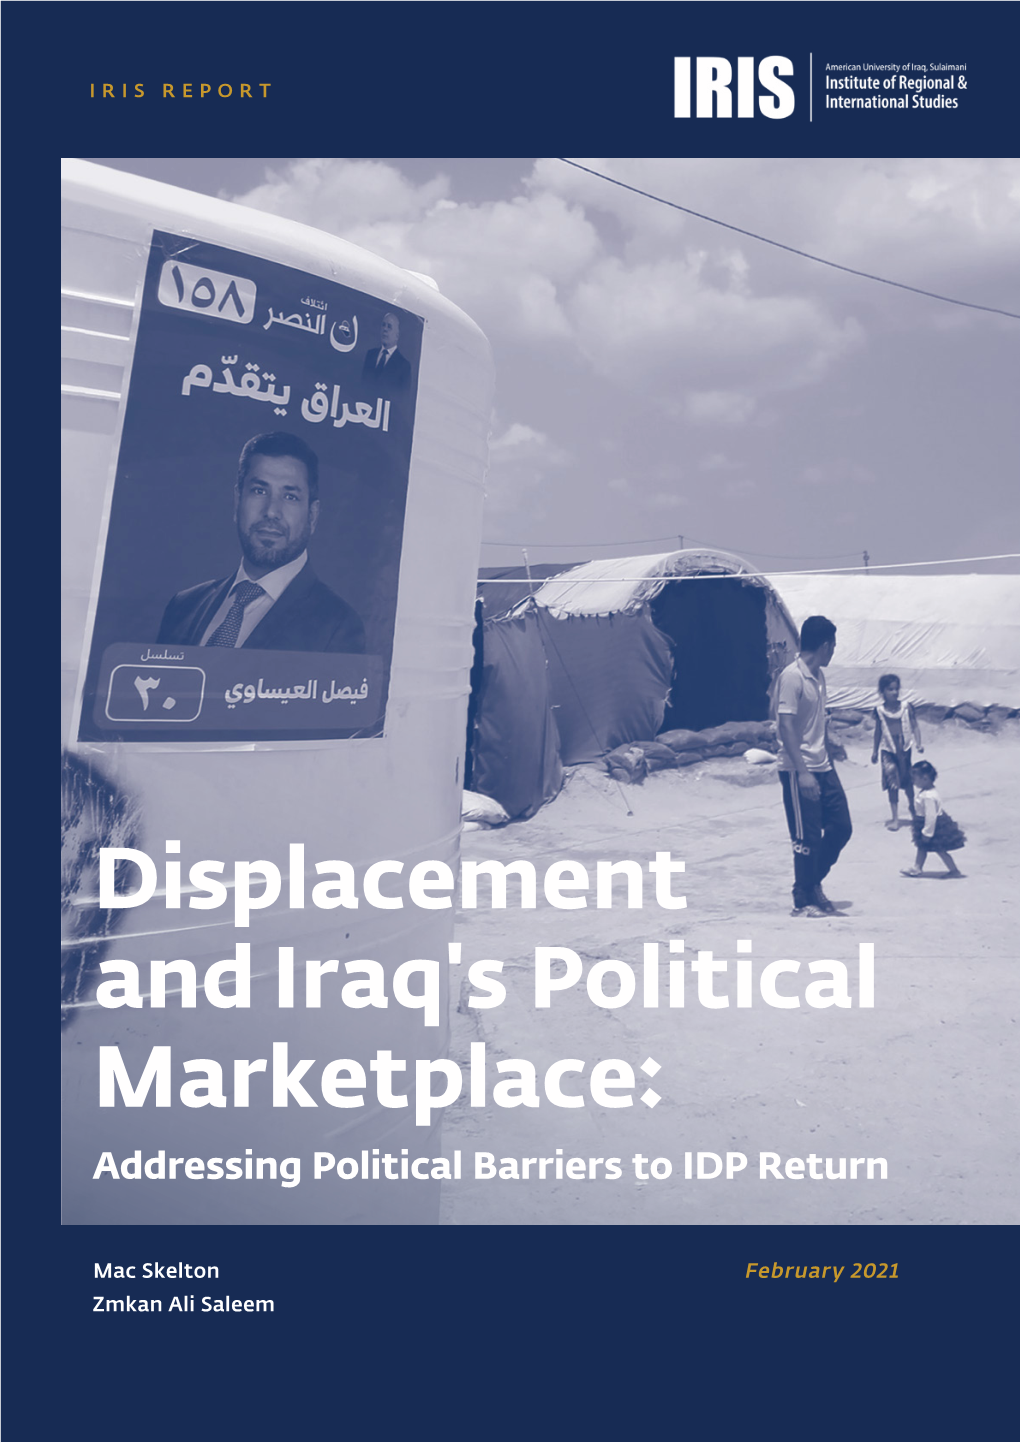 Displacement and Iraq's Political Marketplace: Addressing Political Barriers to IDP Return